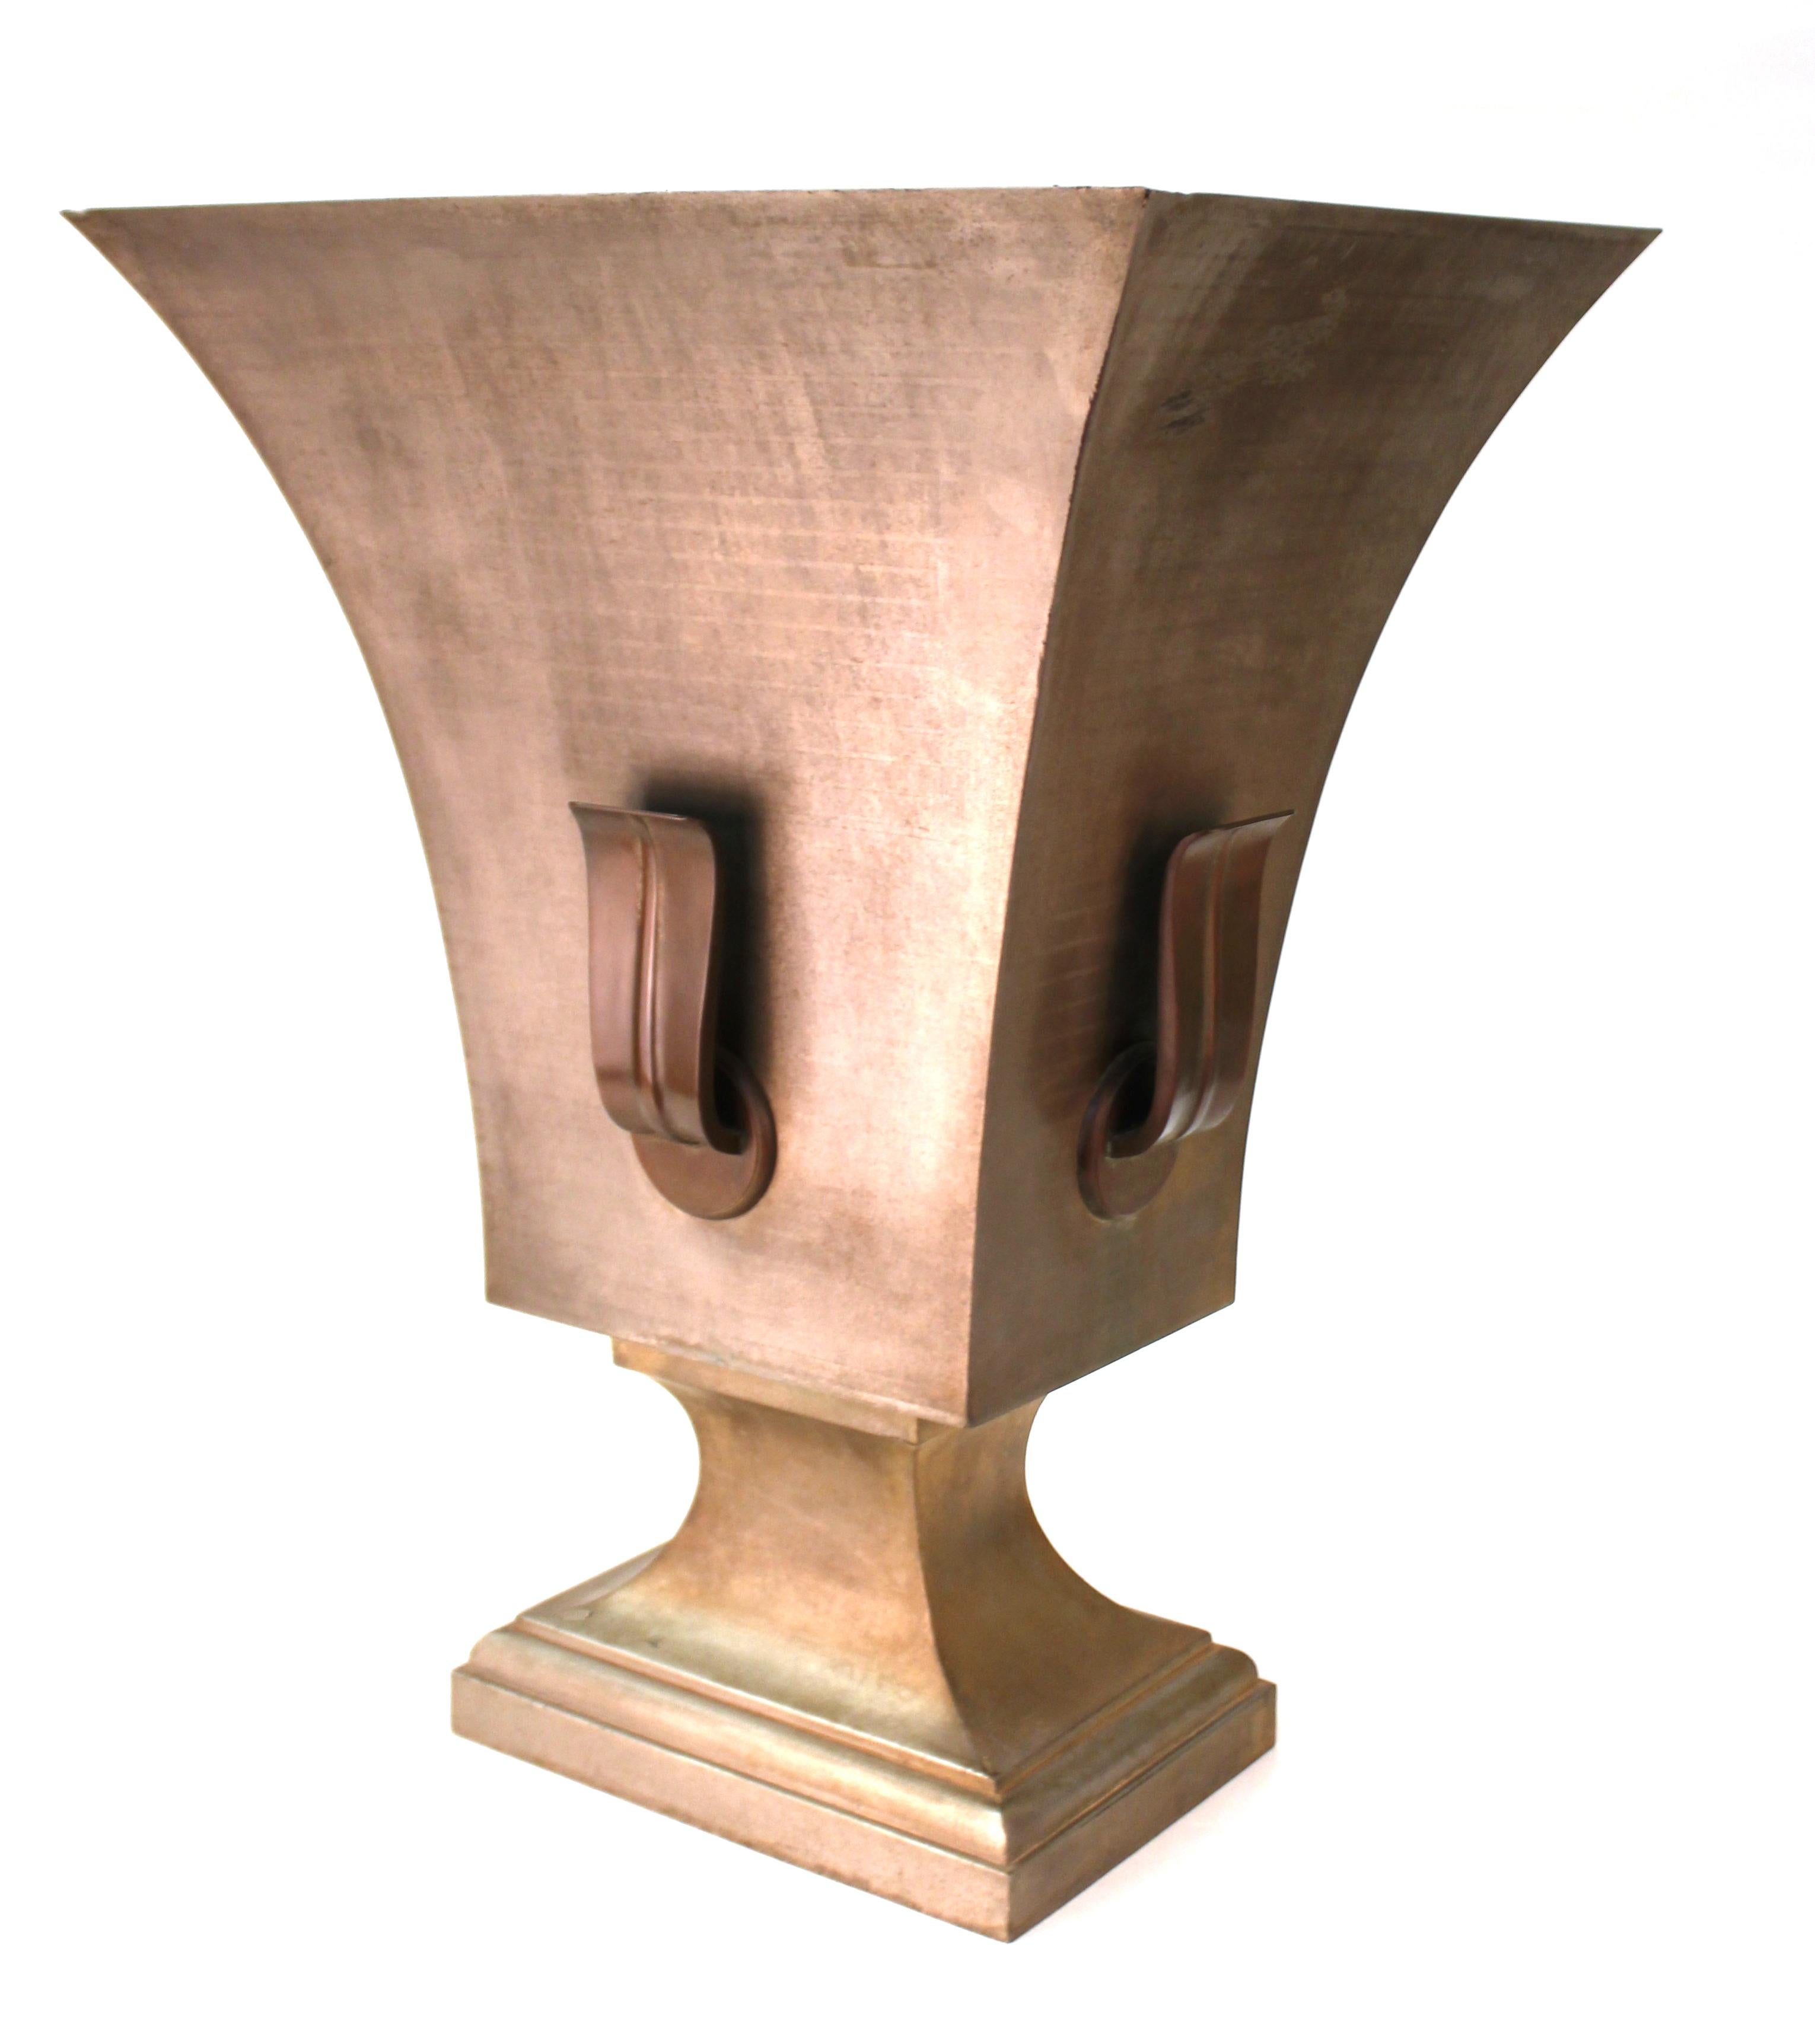 American Art Deco period neoclassical style urn-shaped table base in stripe-silvered brass with cast bronze handles. The piece dates to the late 1920s-early 1930s and was initially wired as a lamp. The piece comes without a tabletop. Age-appropriate